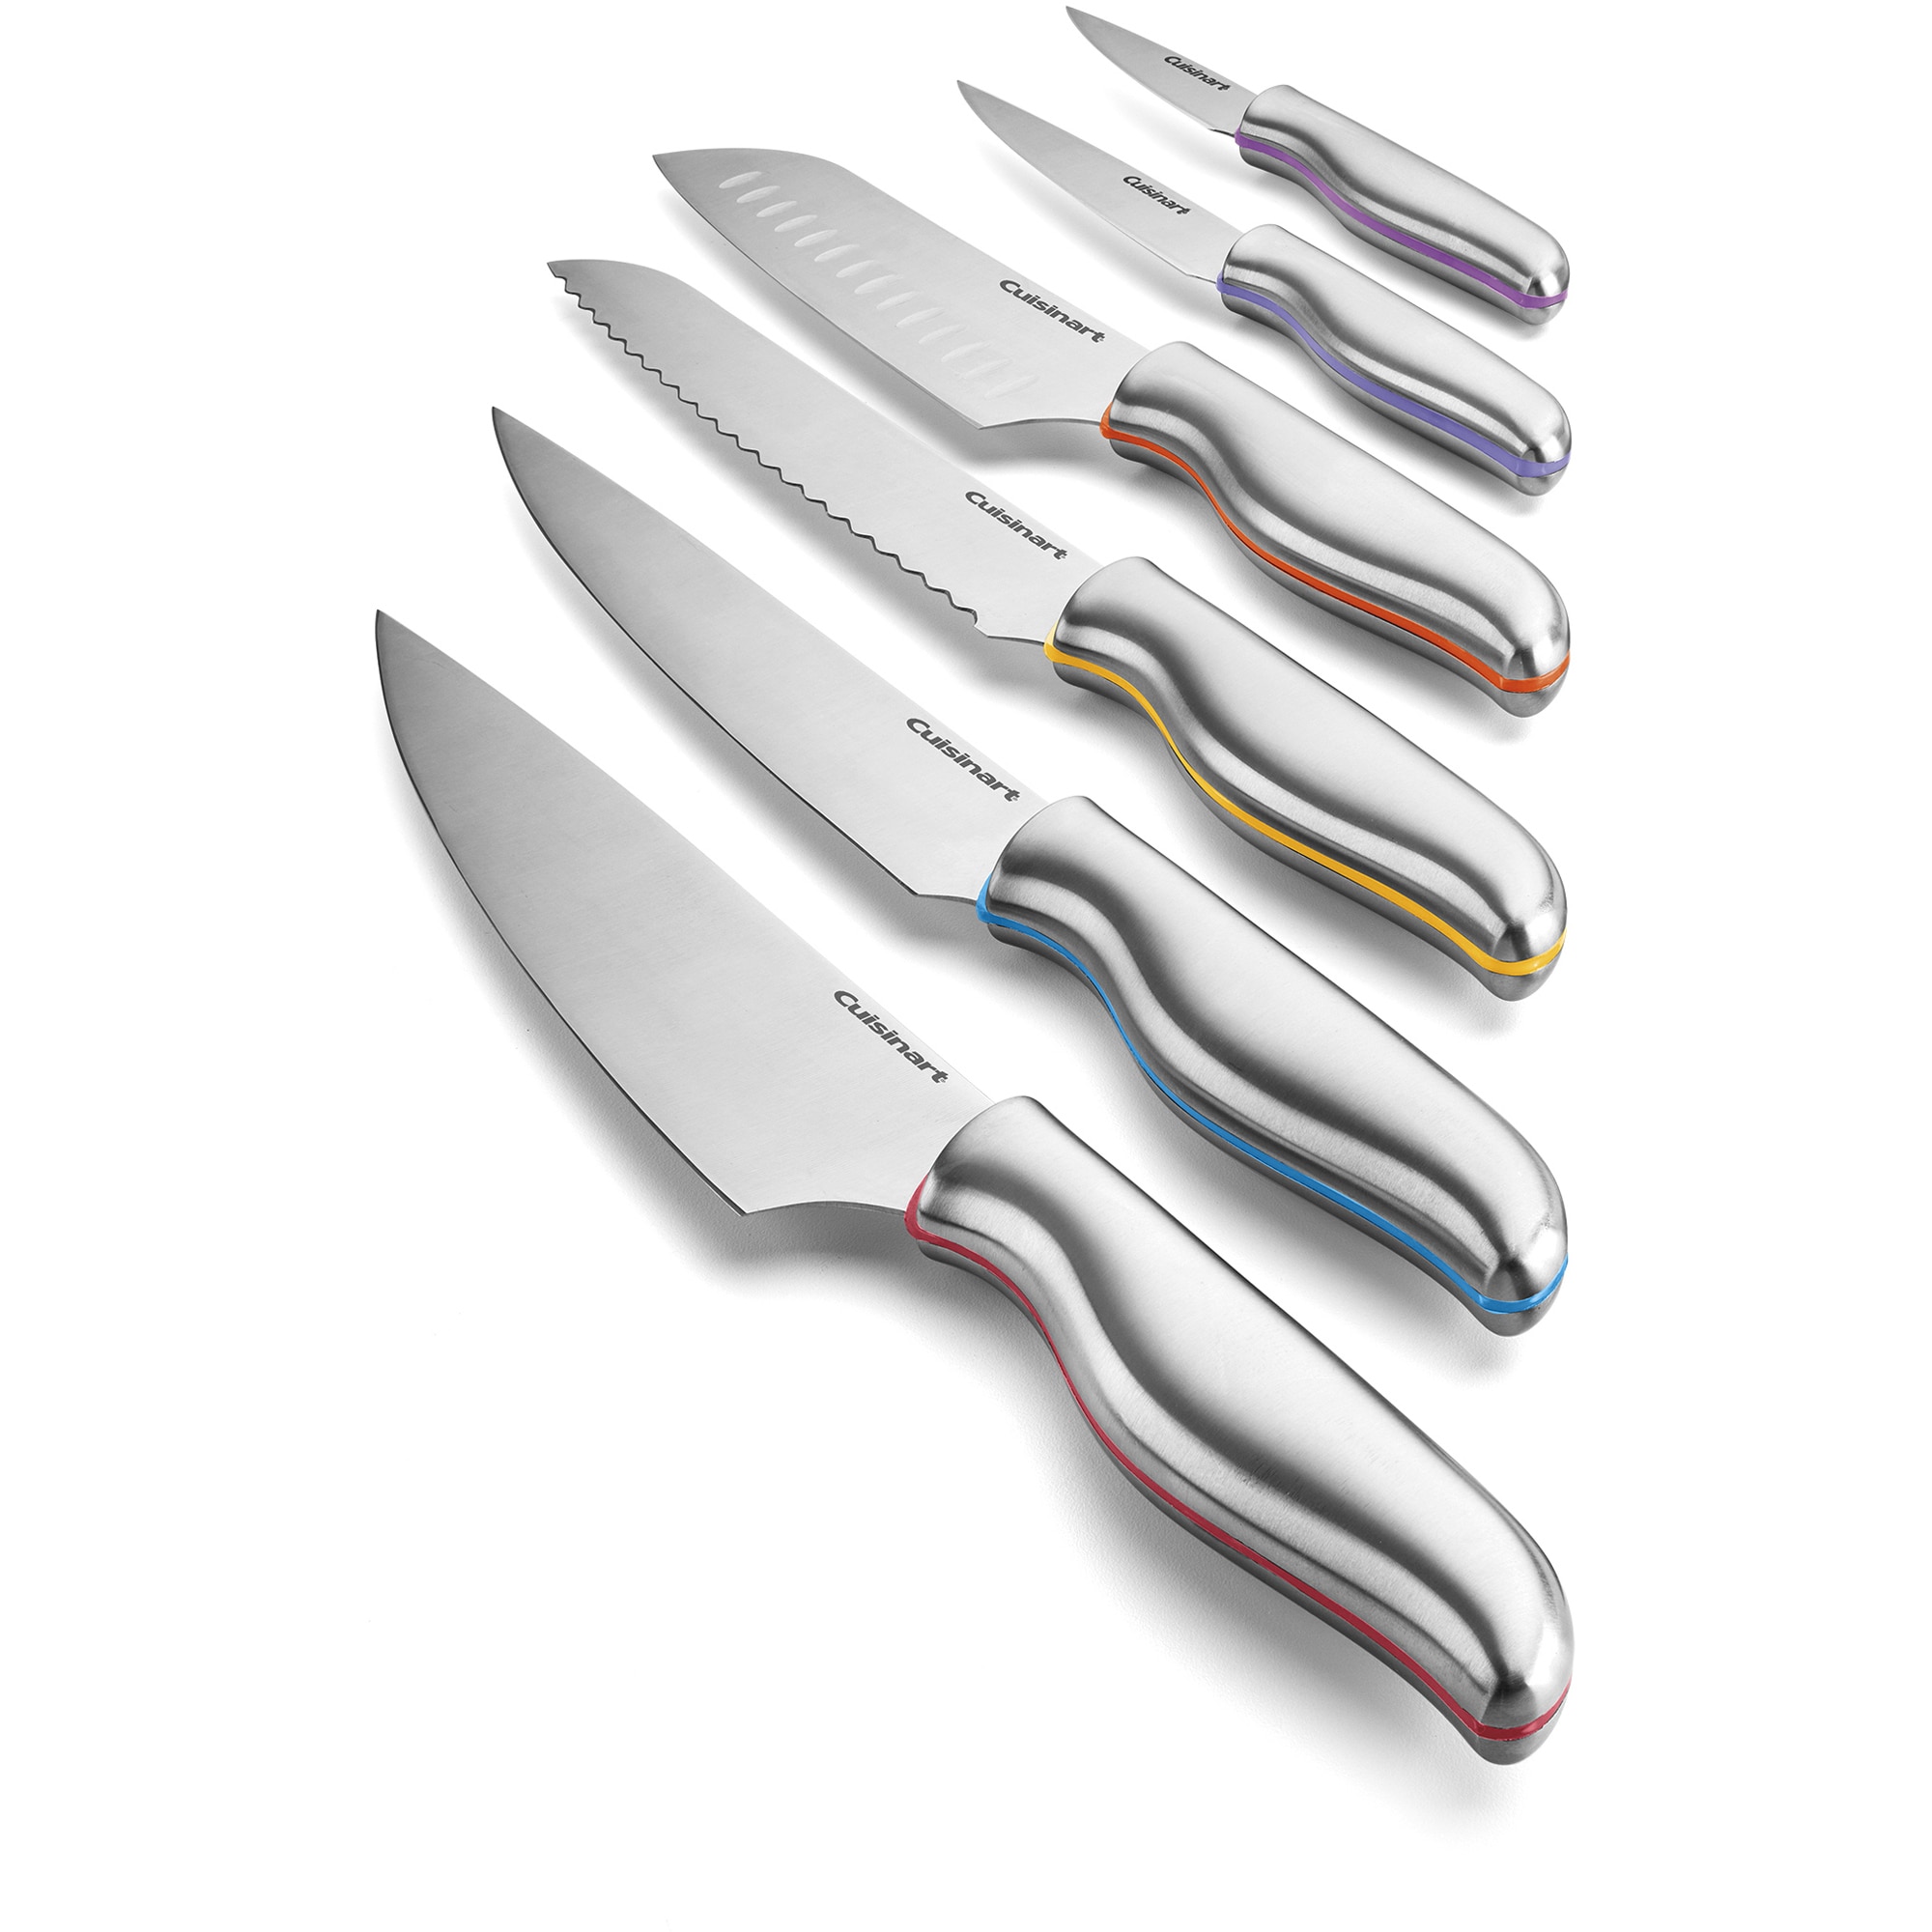 https://ak1.ostkcdn.com/images/products/15980946/Cuisinart-Classic-Stainless-Steel-12-Piece-Color-Band-Knife-Set-with-Blade-Guards-Multicolor-0ee4b105-e9f0-4a1c-8f88-b8ff4585f097.jpg